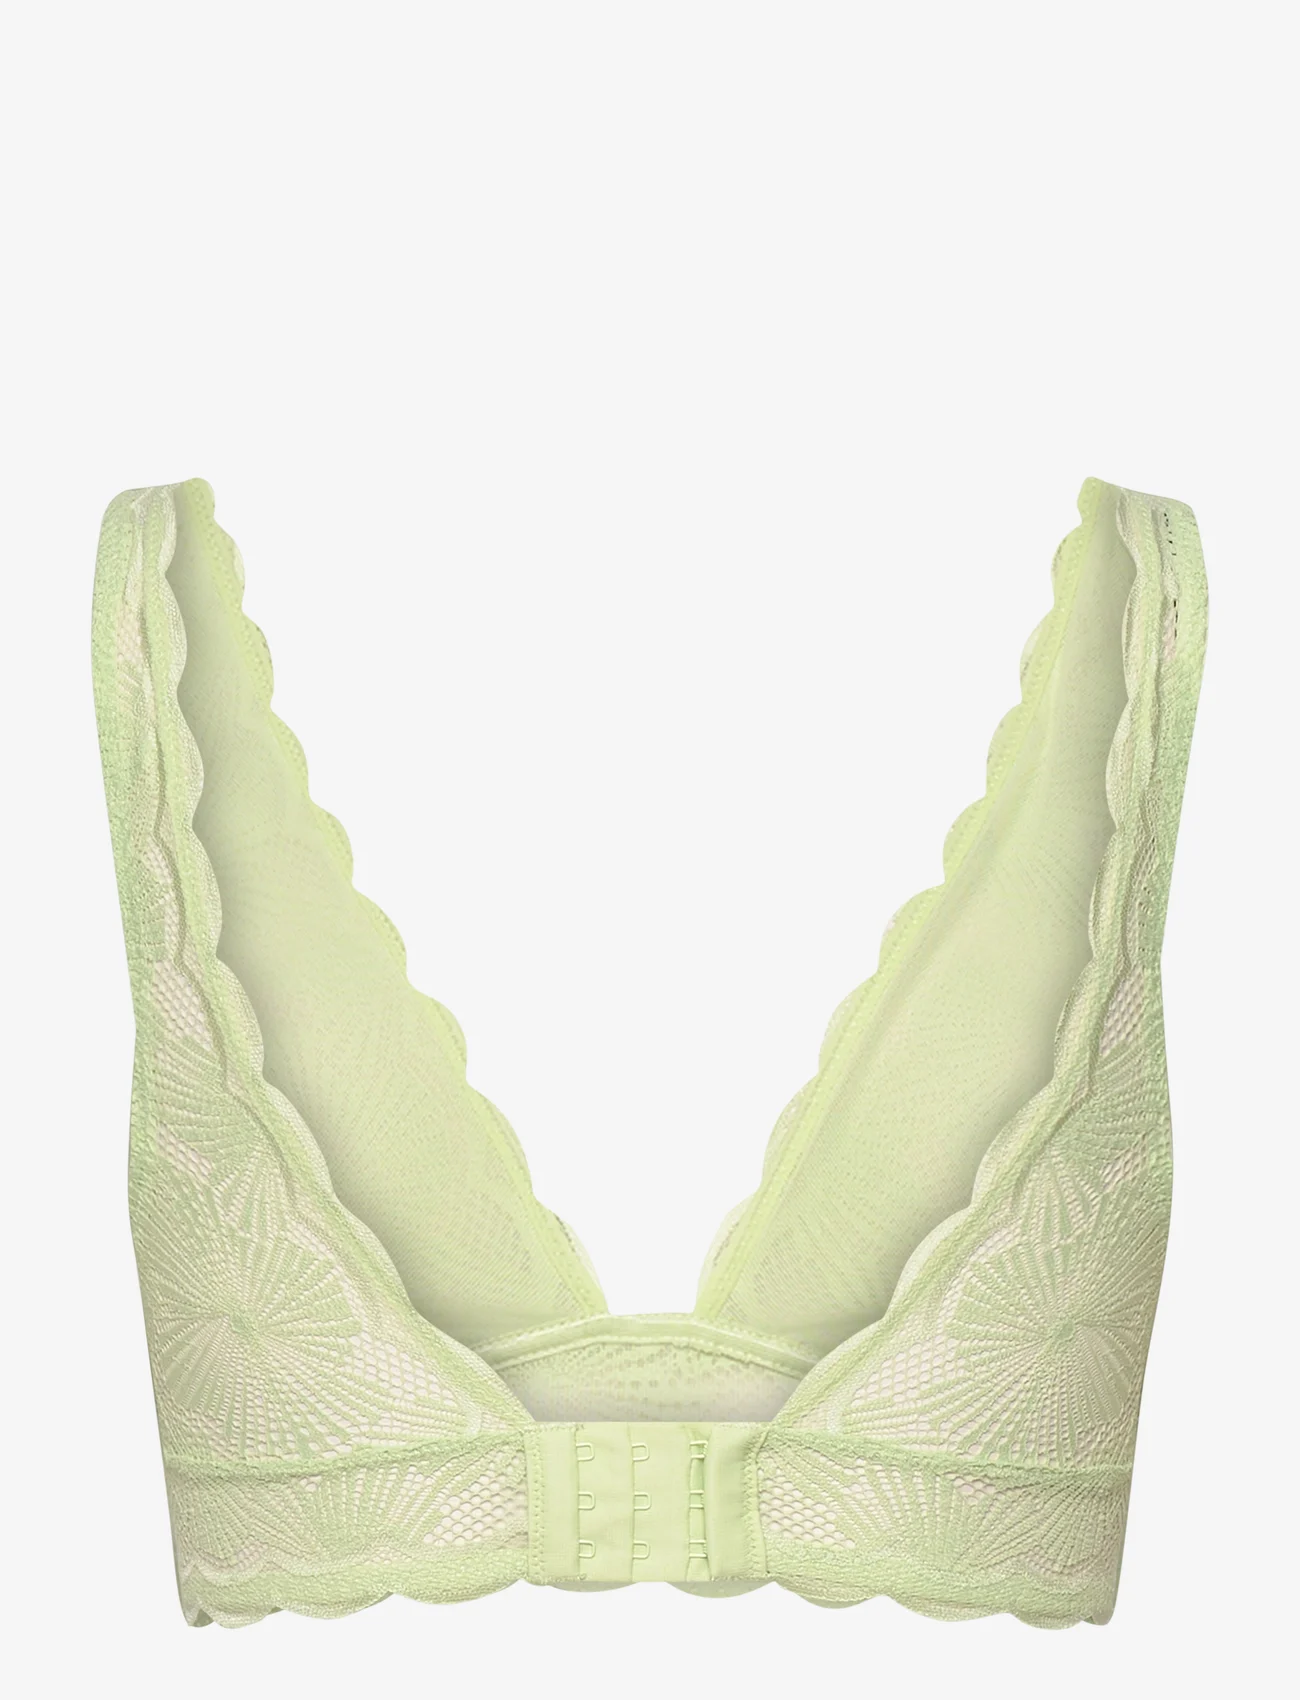 Esprit Bodywear Women - Non-padded, non-wired bra made of patterned lace - light green - 1